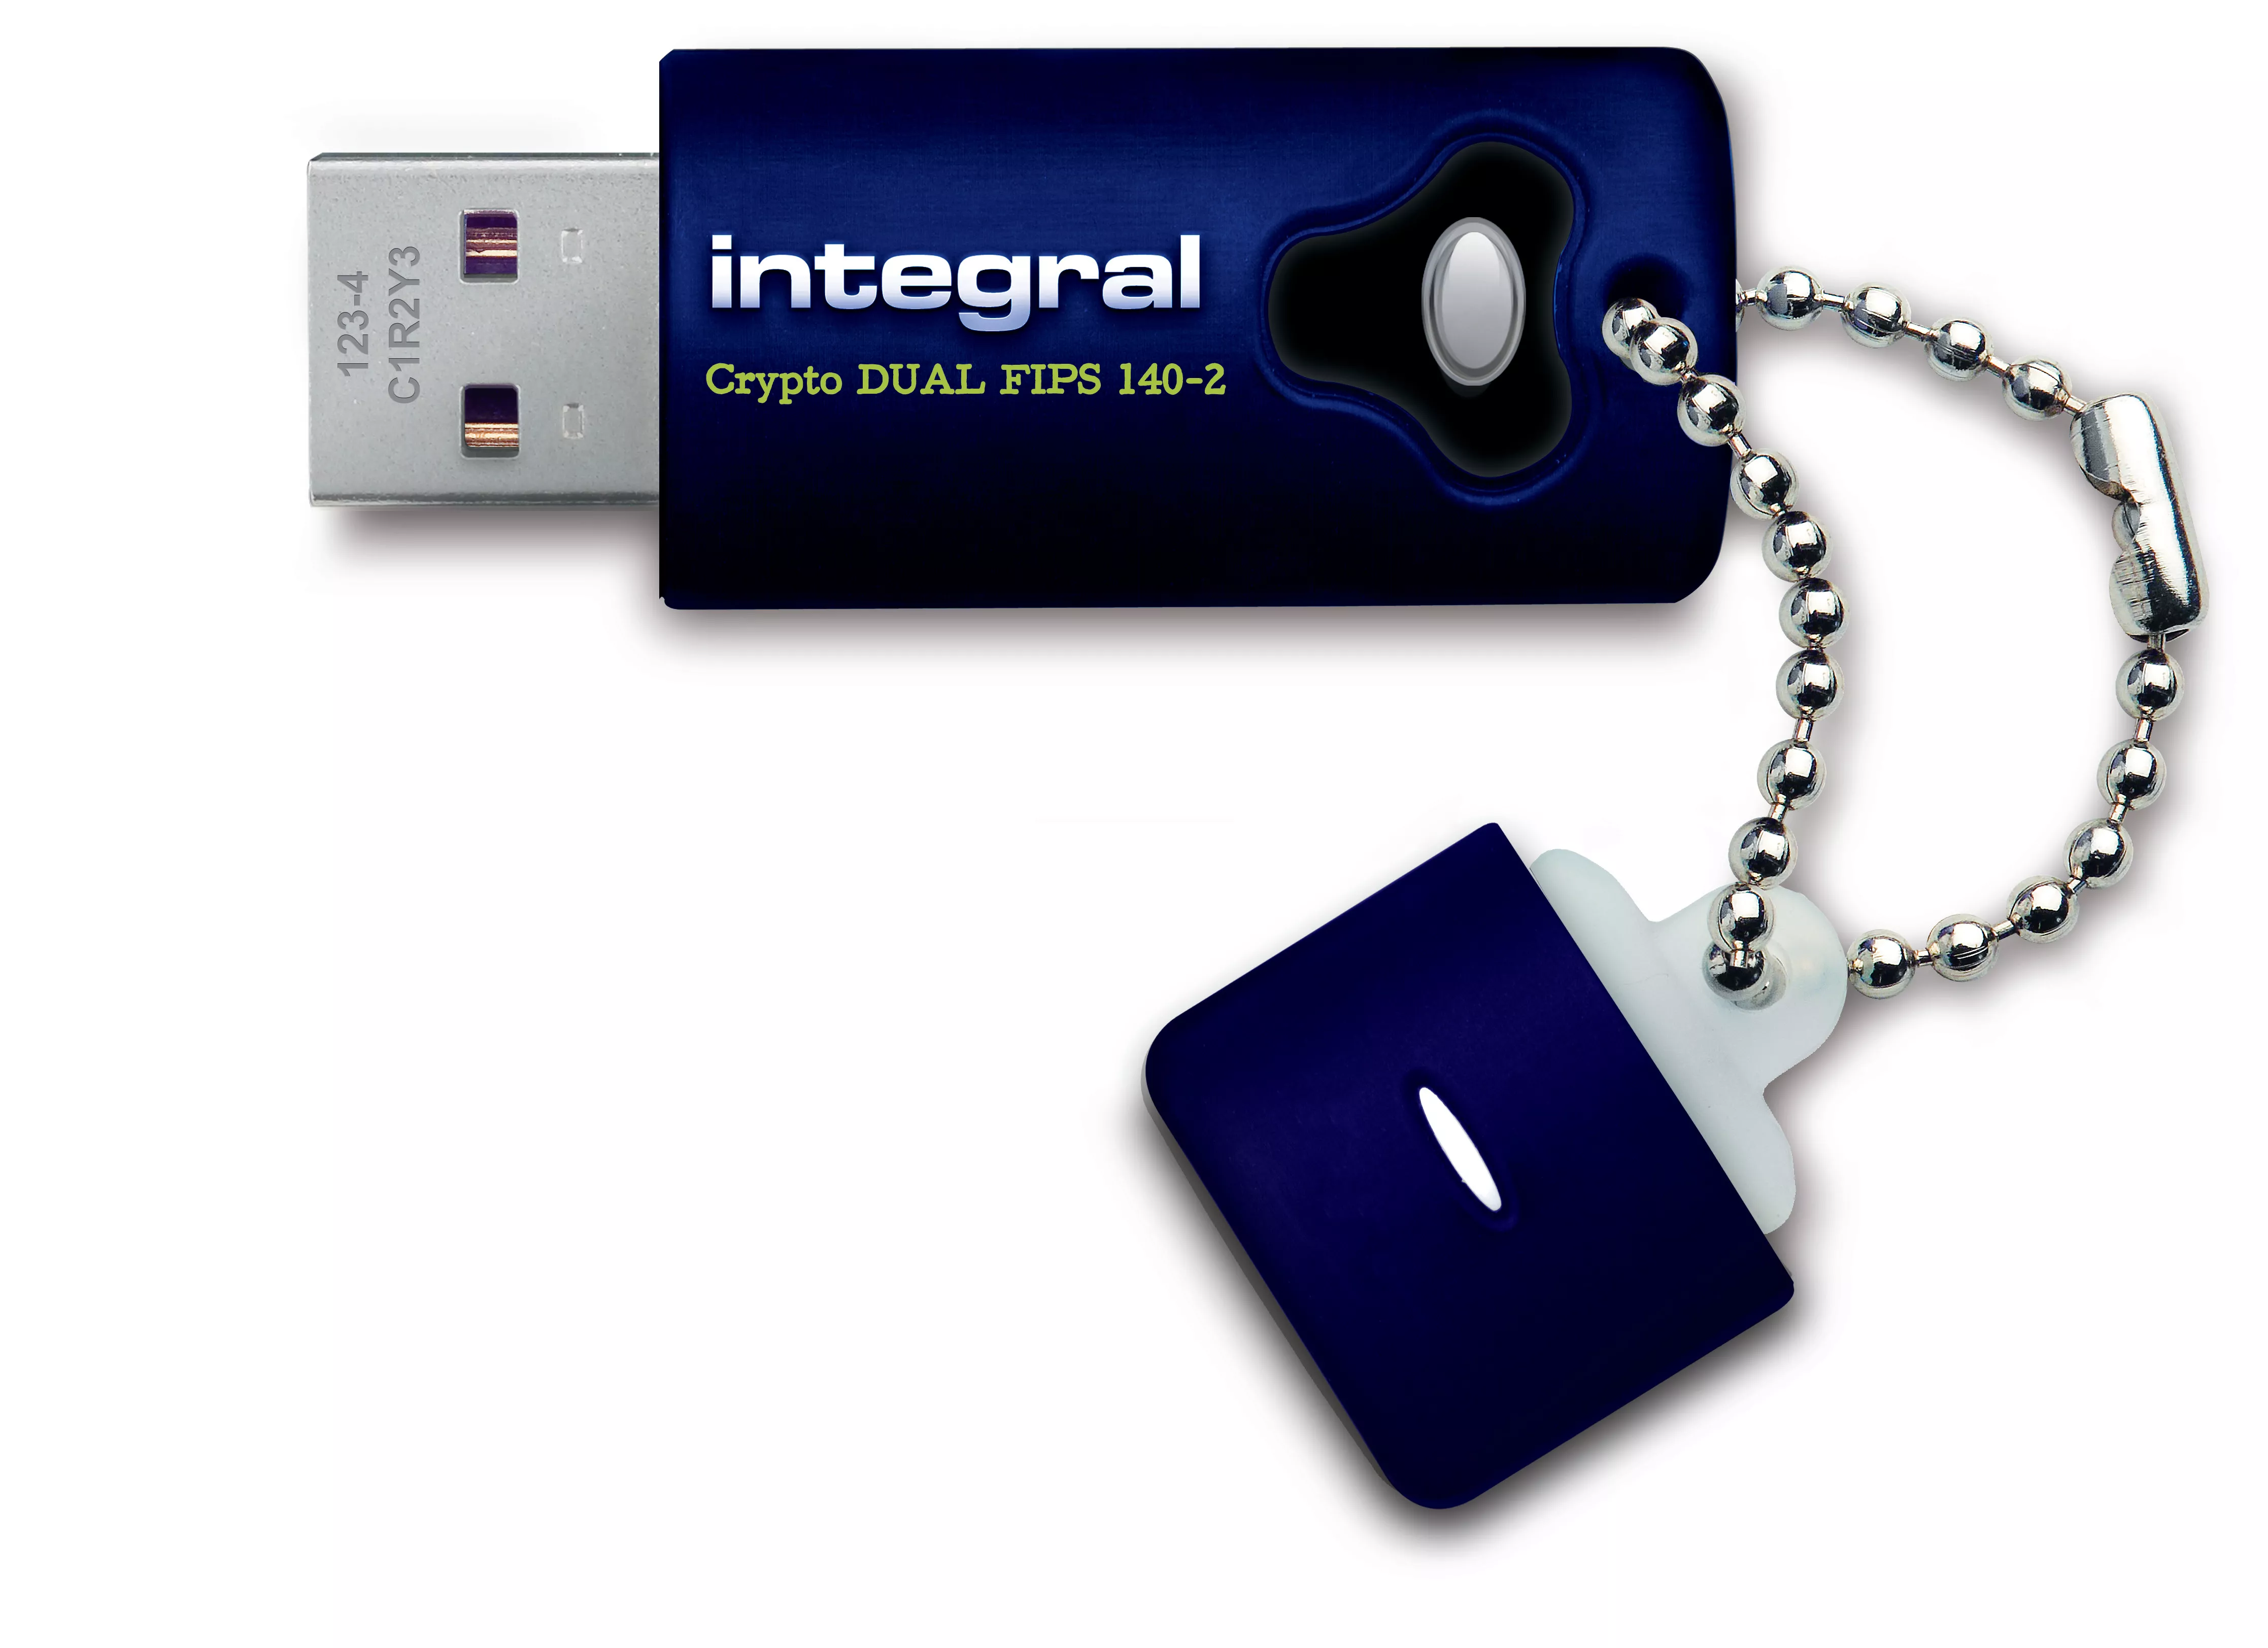 Achat Adaptateur stockage Integral 32GB Crypto Dual FIPS 140-2 Encrypted USB 3.0 sur hello RSE